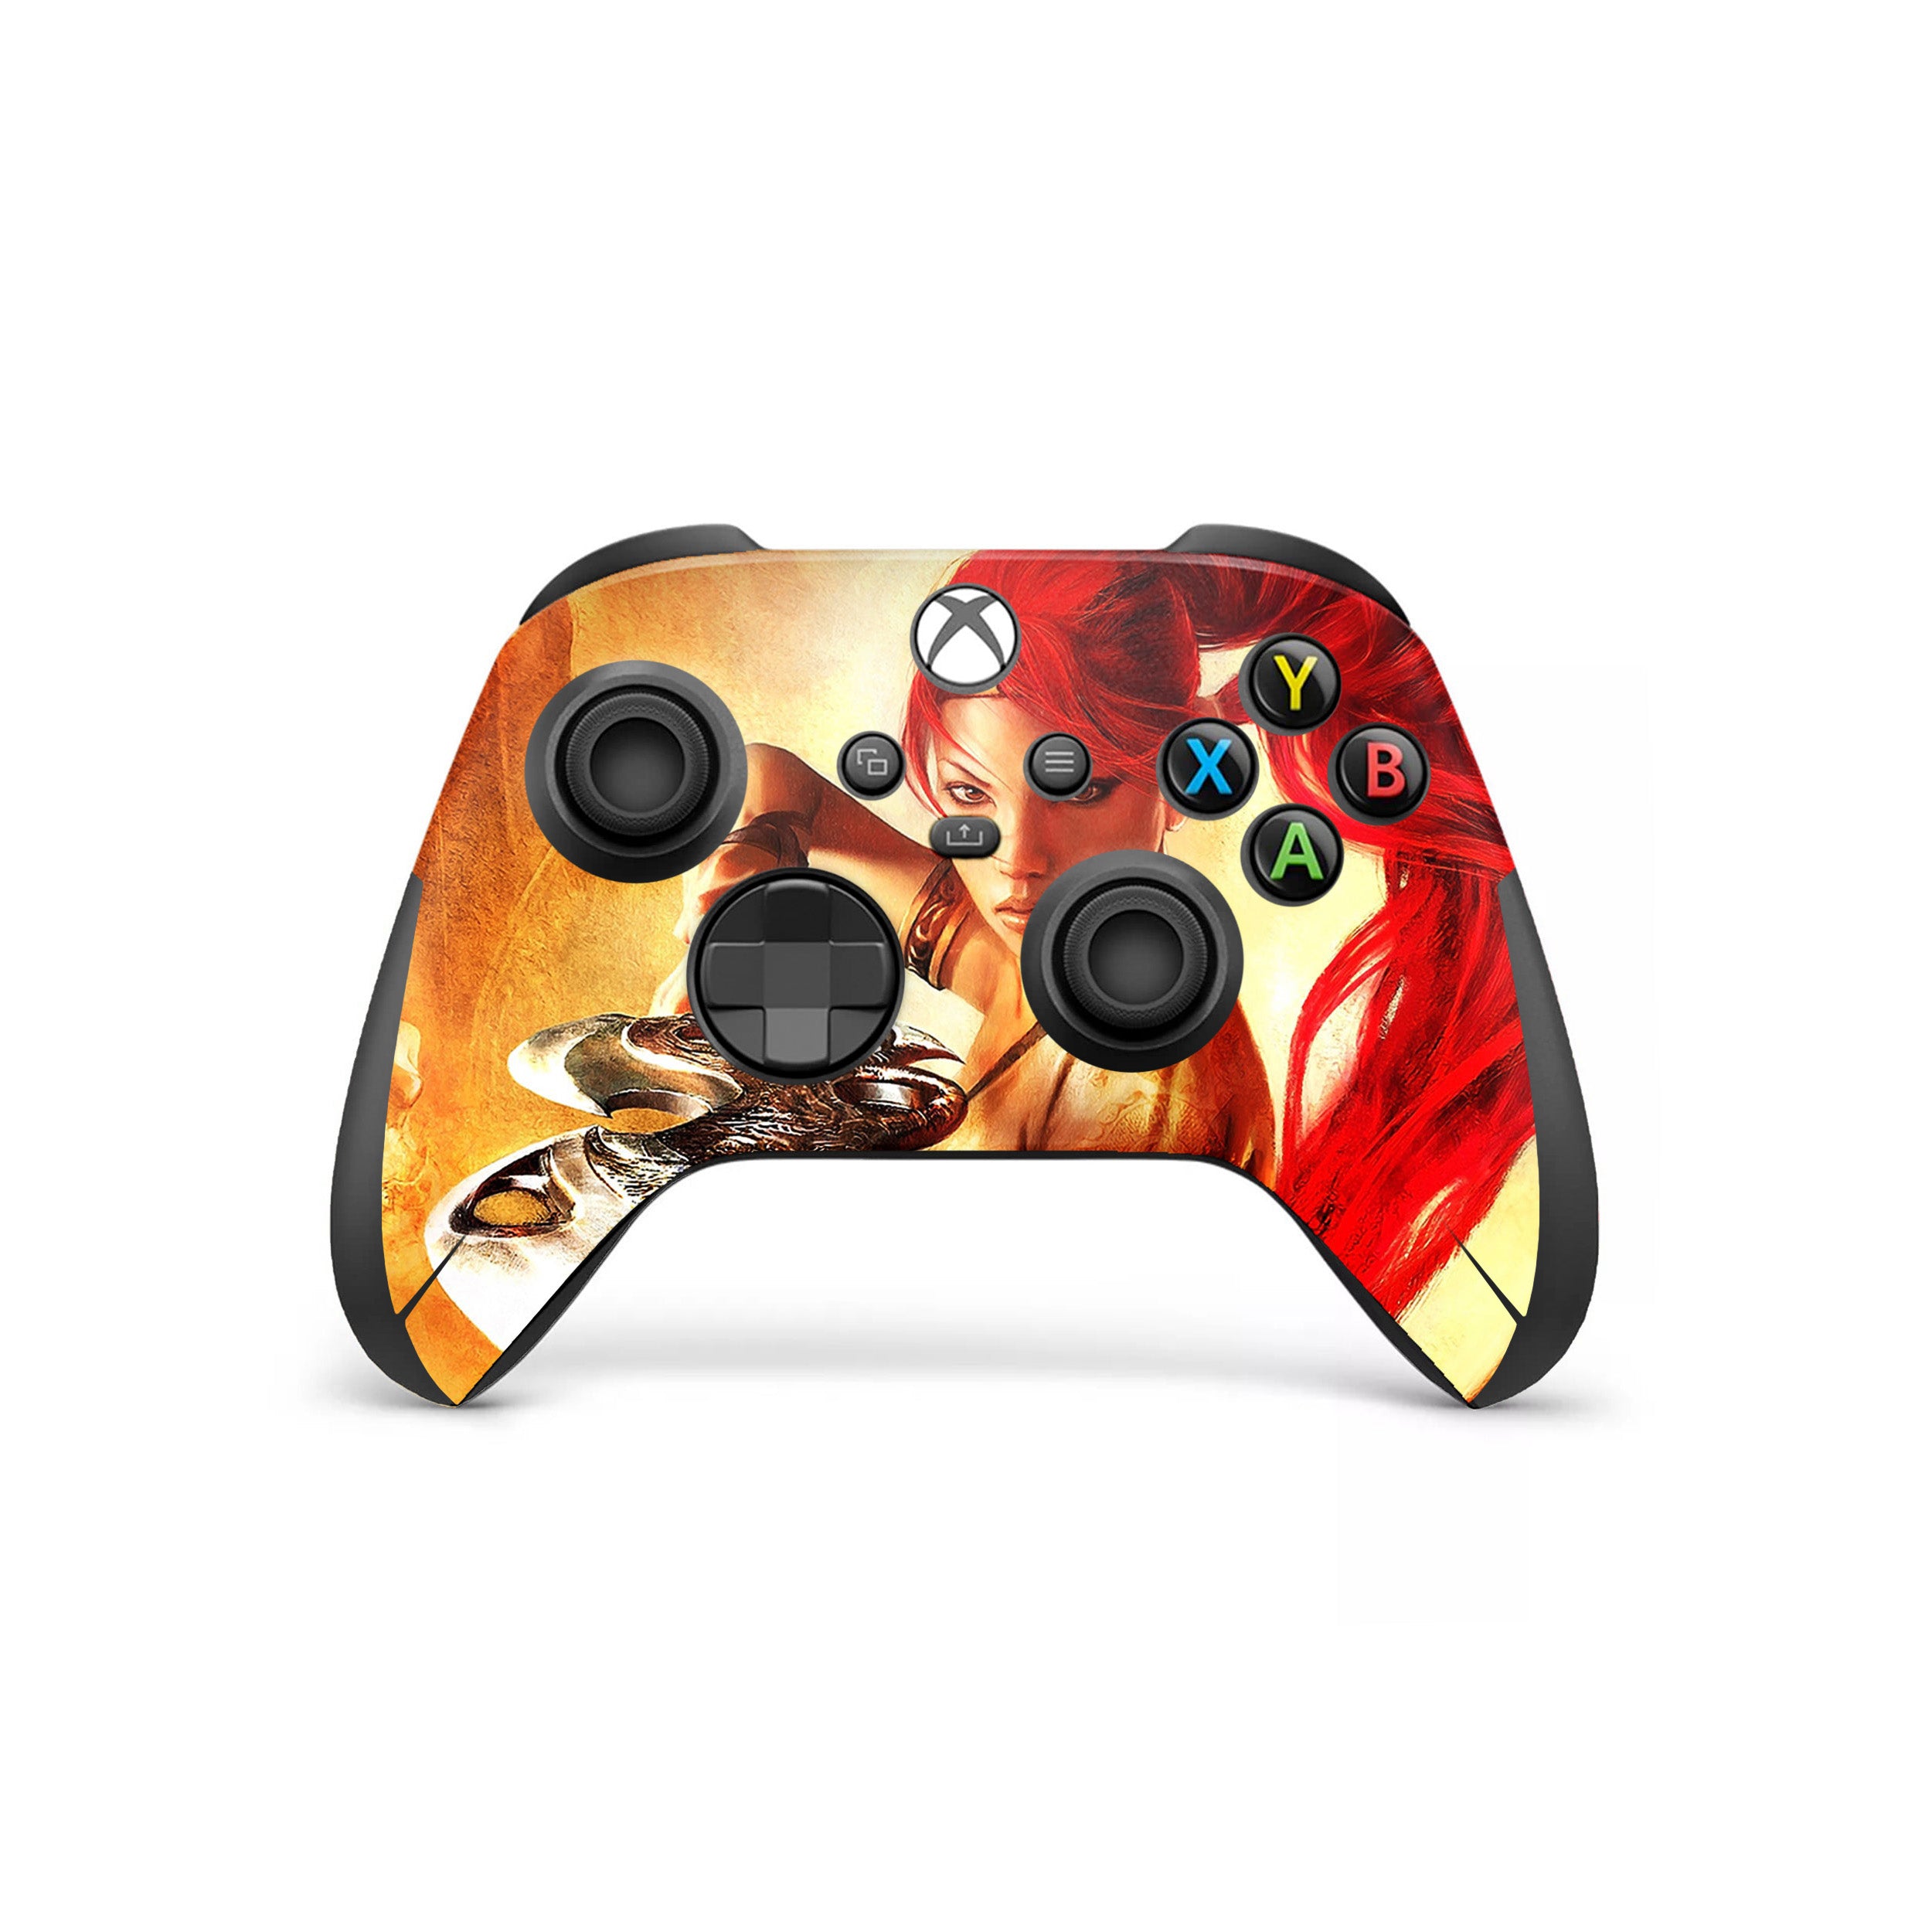 A video game skin featuring a Heavenly Sword design for the Xbox Wireless Controller.